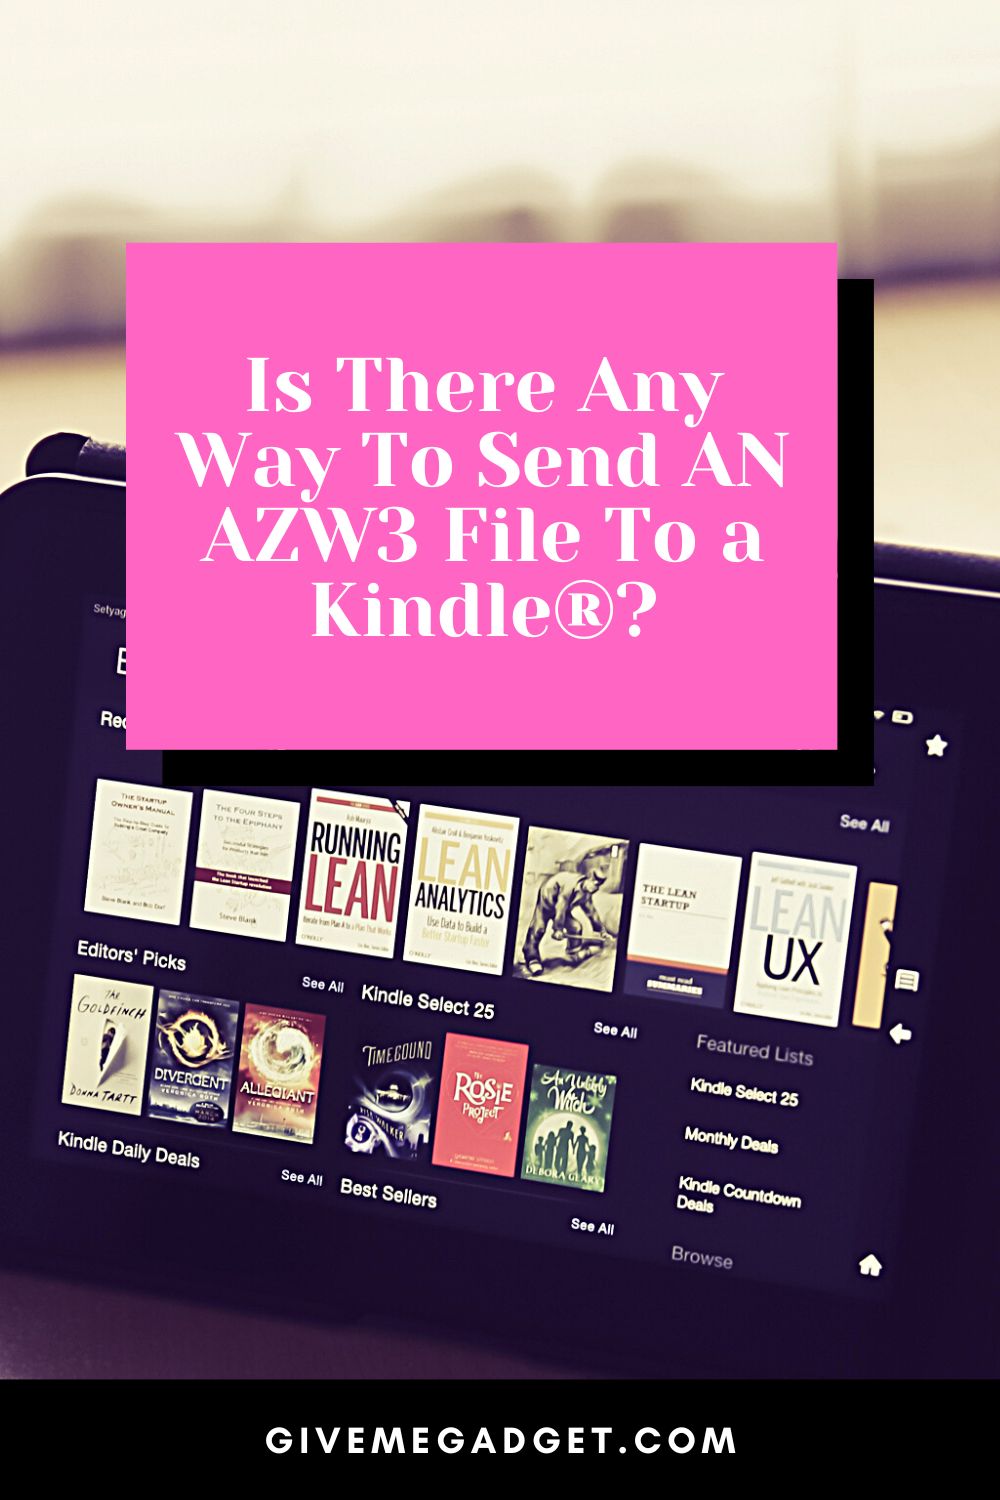 Is there Any Way to Send an AZW3 File to a Kindle?